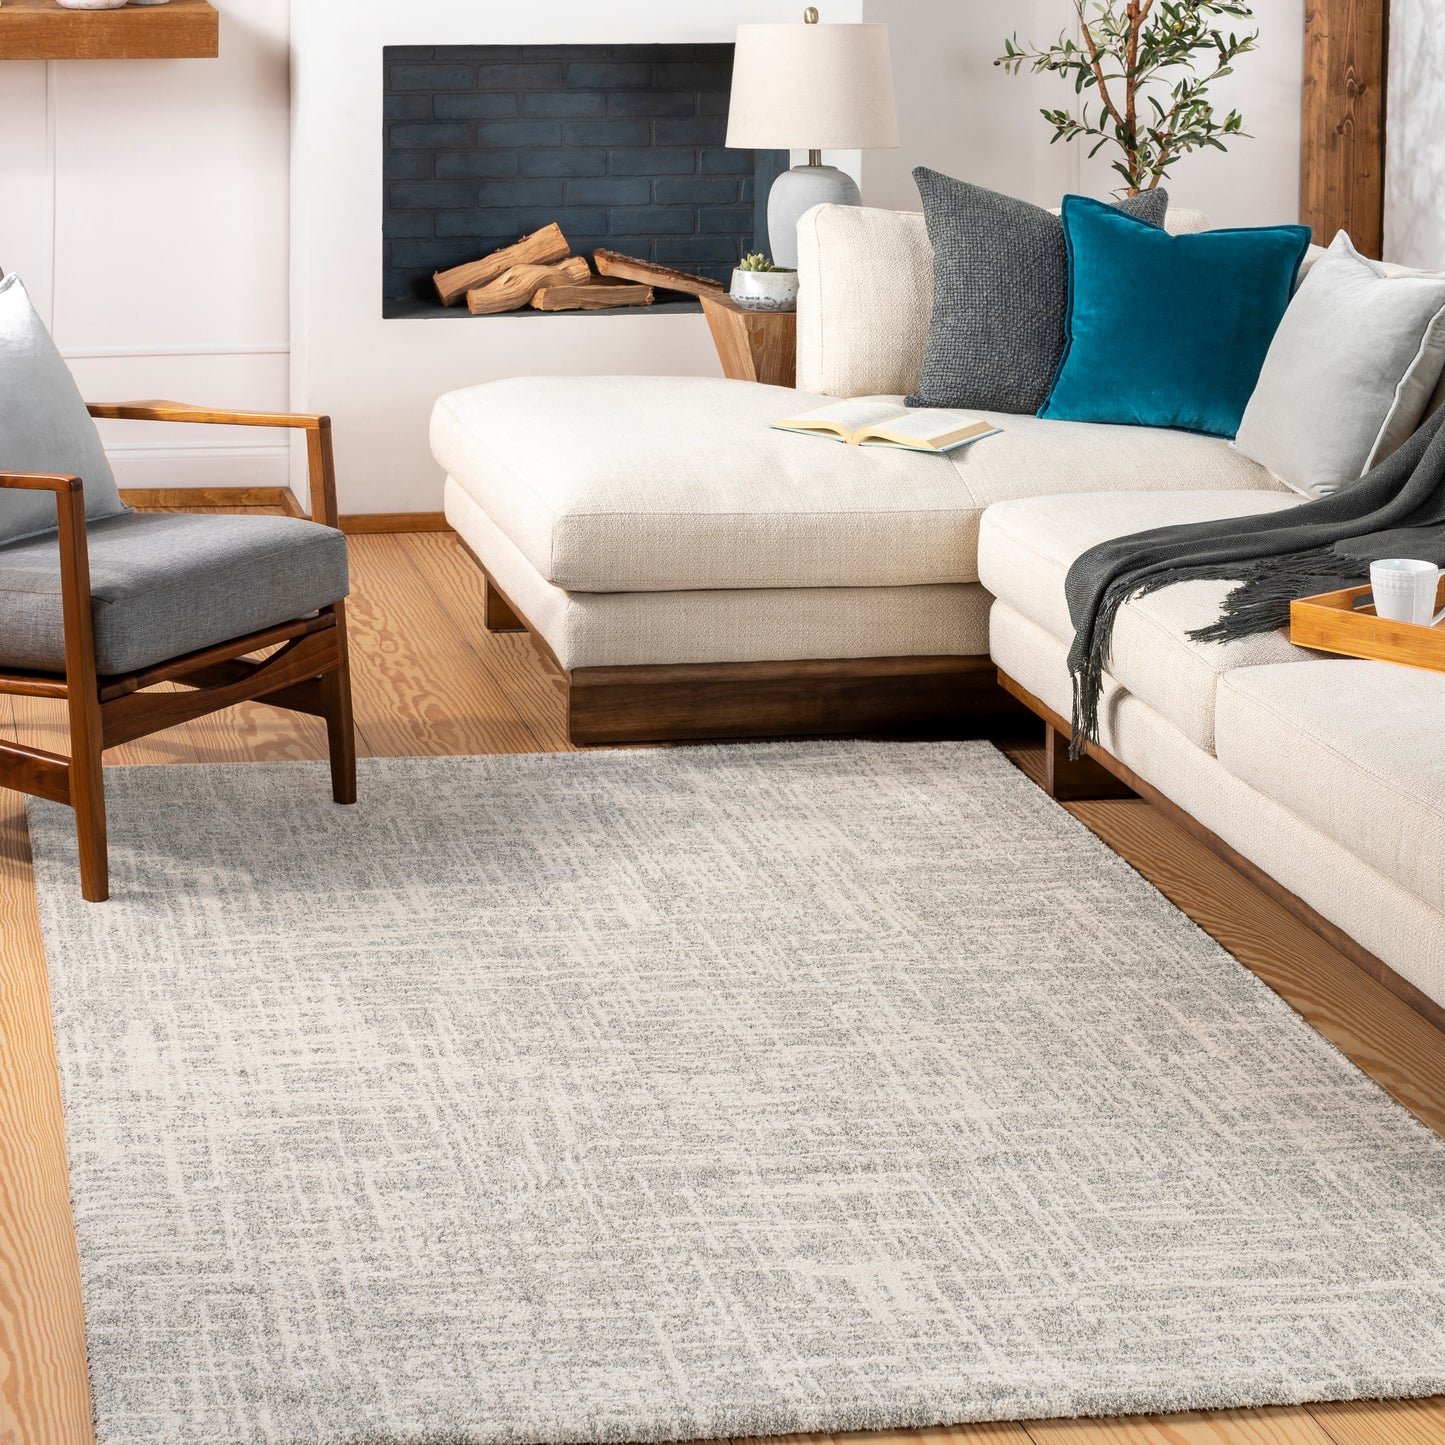 Gavic 26641 Machine Woven Synthetic Blend Indoor Area Rug by Surya Rugs